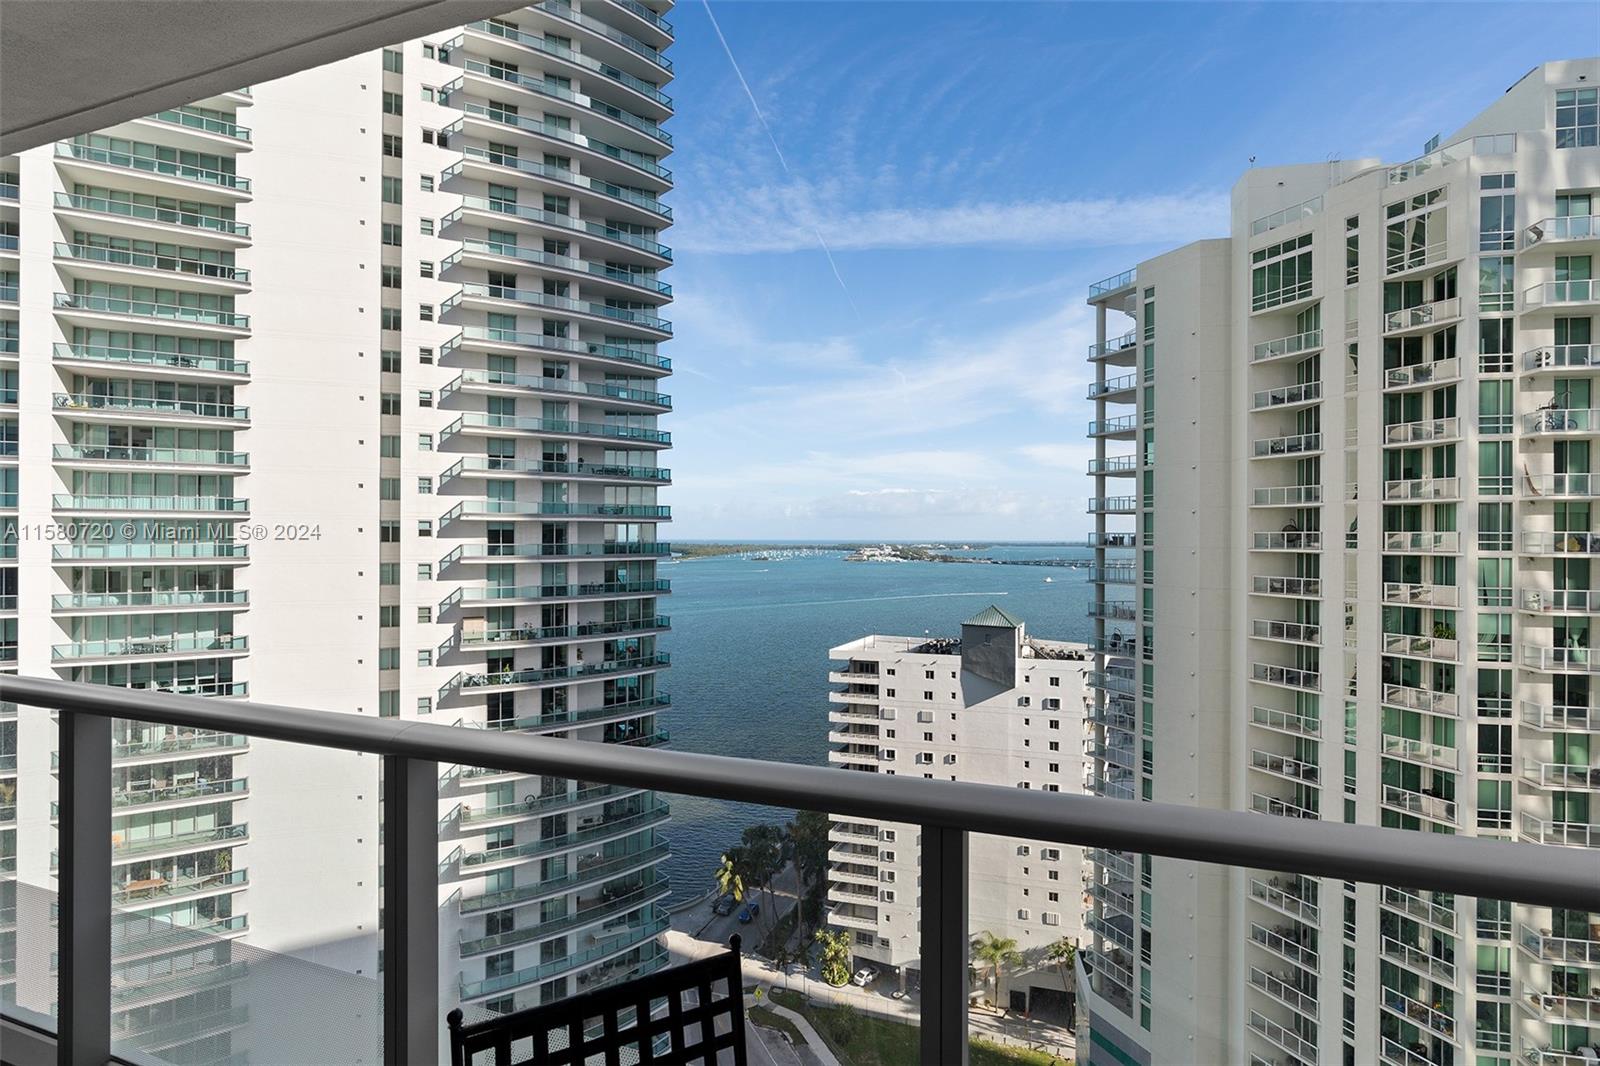 BRICKELL HOUSE combines it all, location, Design and Modern Lifestyle, Great Finishes: Italian Porcelain Floors, Simil Wood, California Closets, Amazing Water View, Automatic Robot Parking Space, 2 Pools, Fitness Center, Lounge, Located in the Heart of Brickell.